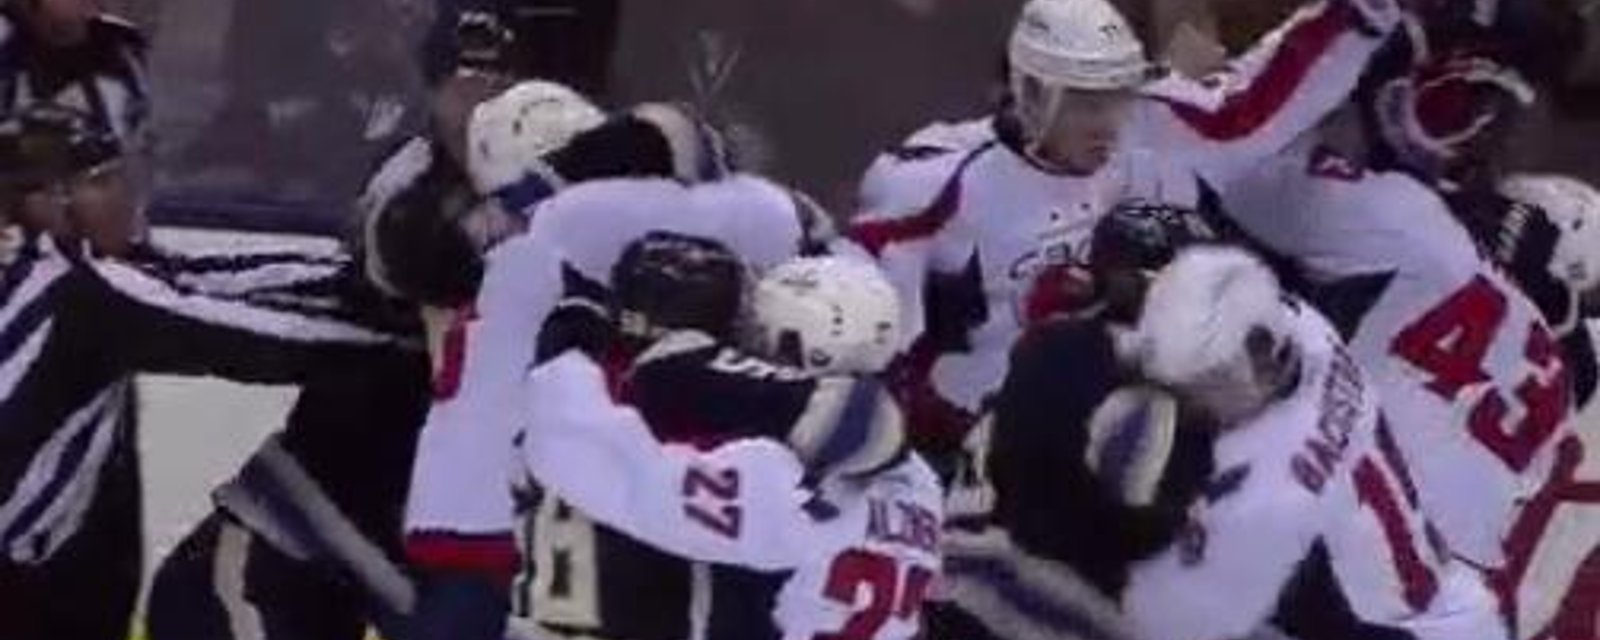 Ovechkin just dropped the mitts in unfair sequence! 